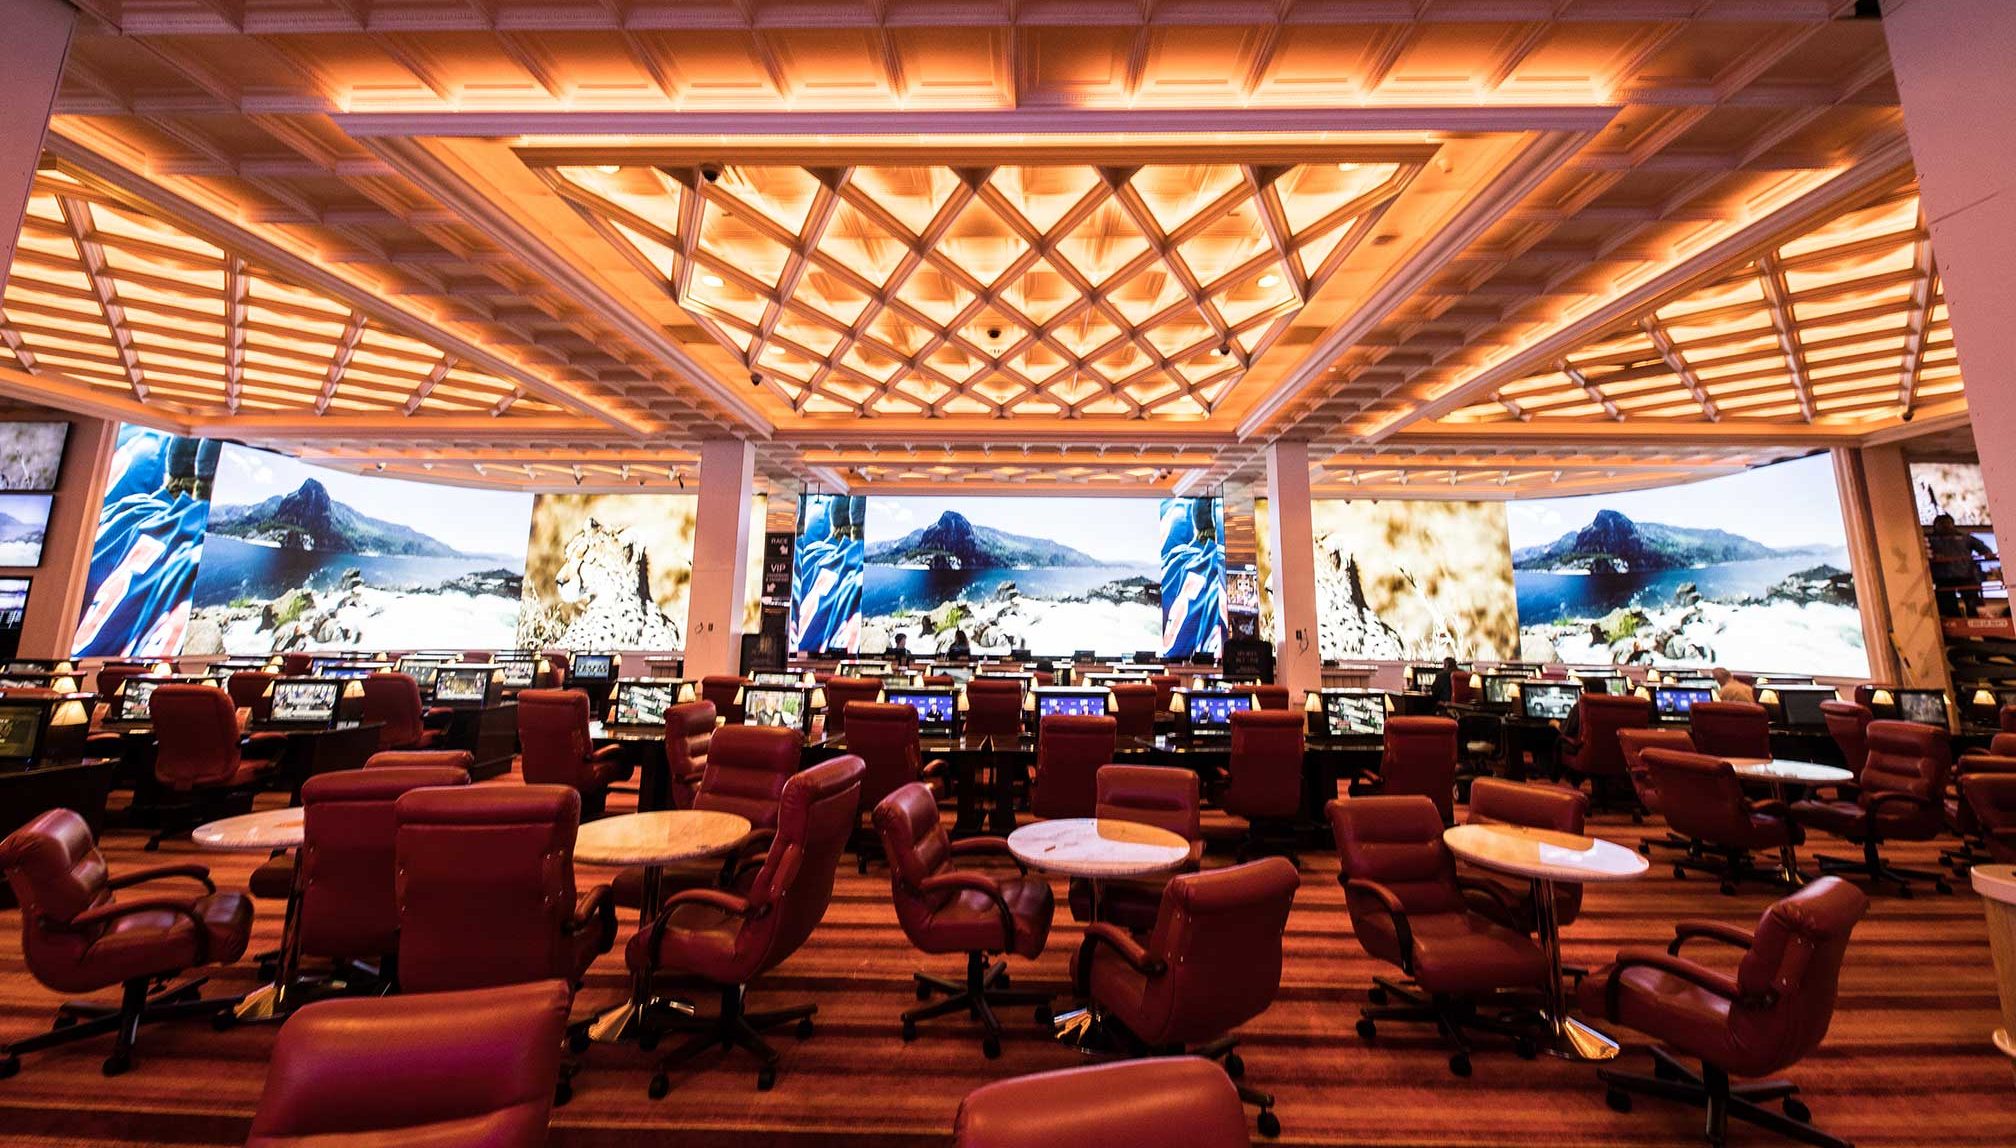 Reno's Peppermill Sportsbook Draws Massive Crowds With Curved LED